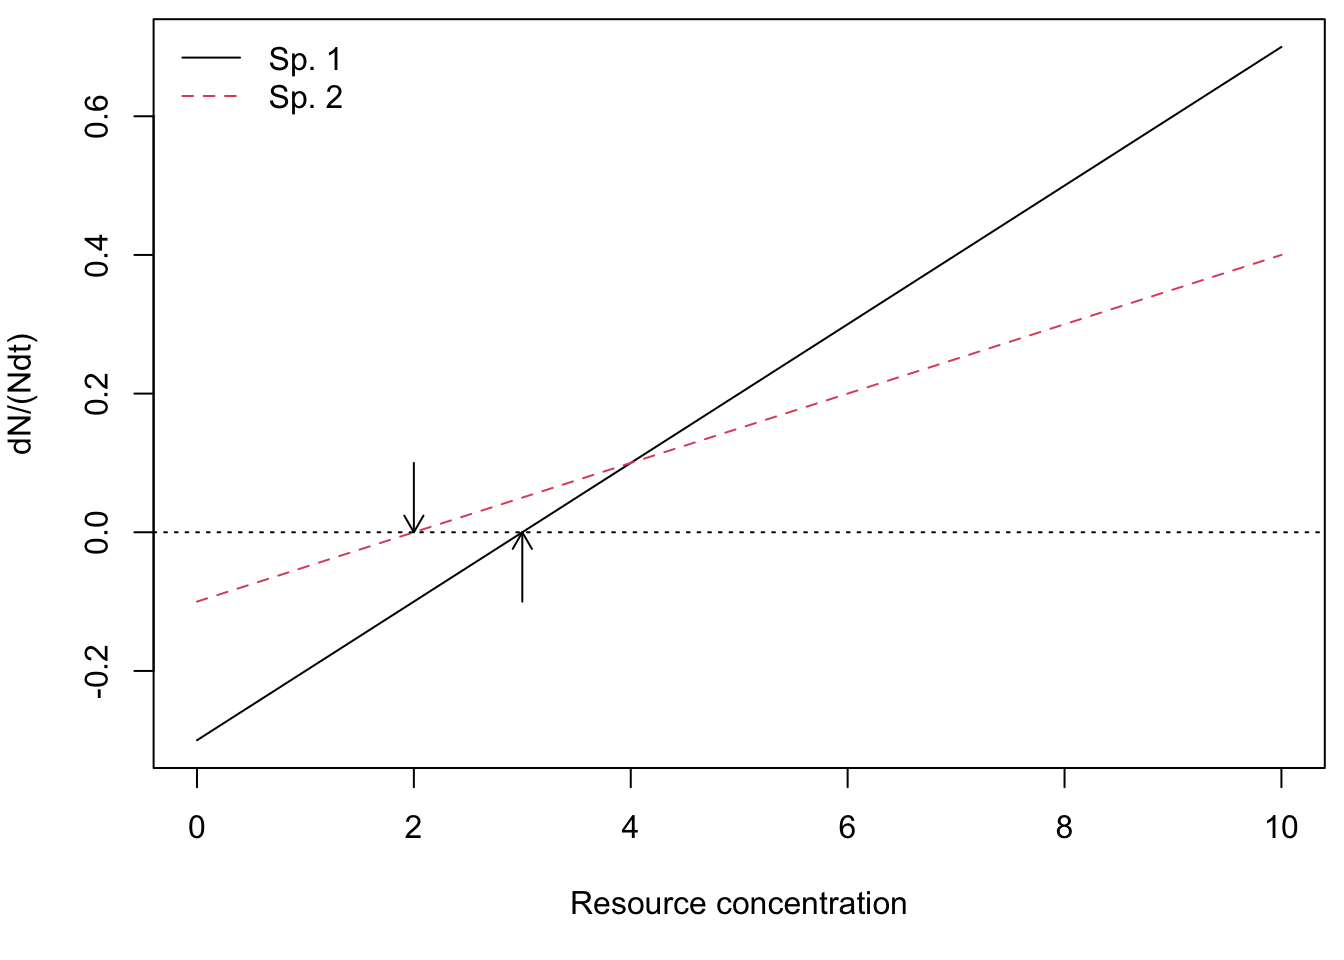 Mass-specific growth rates of two species across a range of resource concentrations. Note that where growth rates equal death rates, consumer growth is zero (arrows) and this determines each species' $R^*$s.